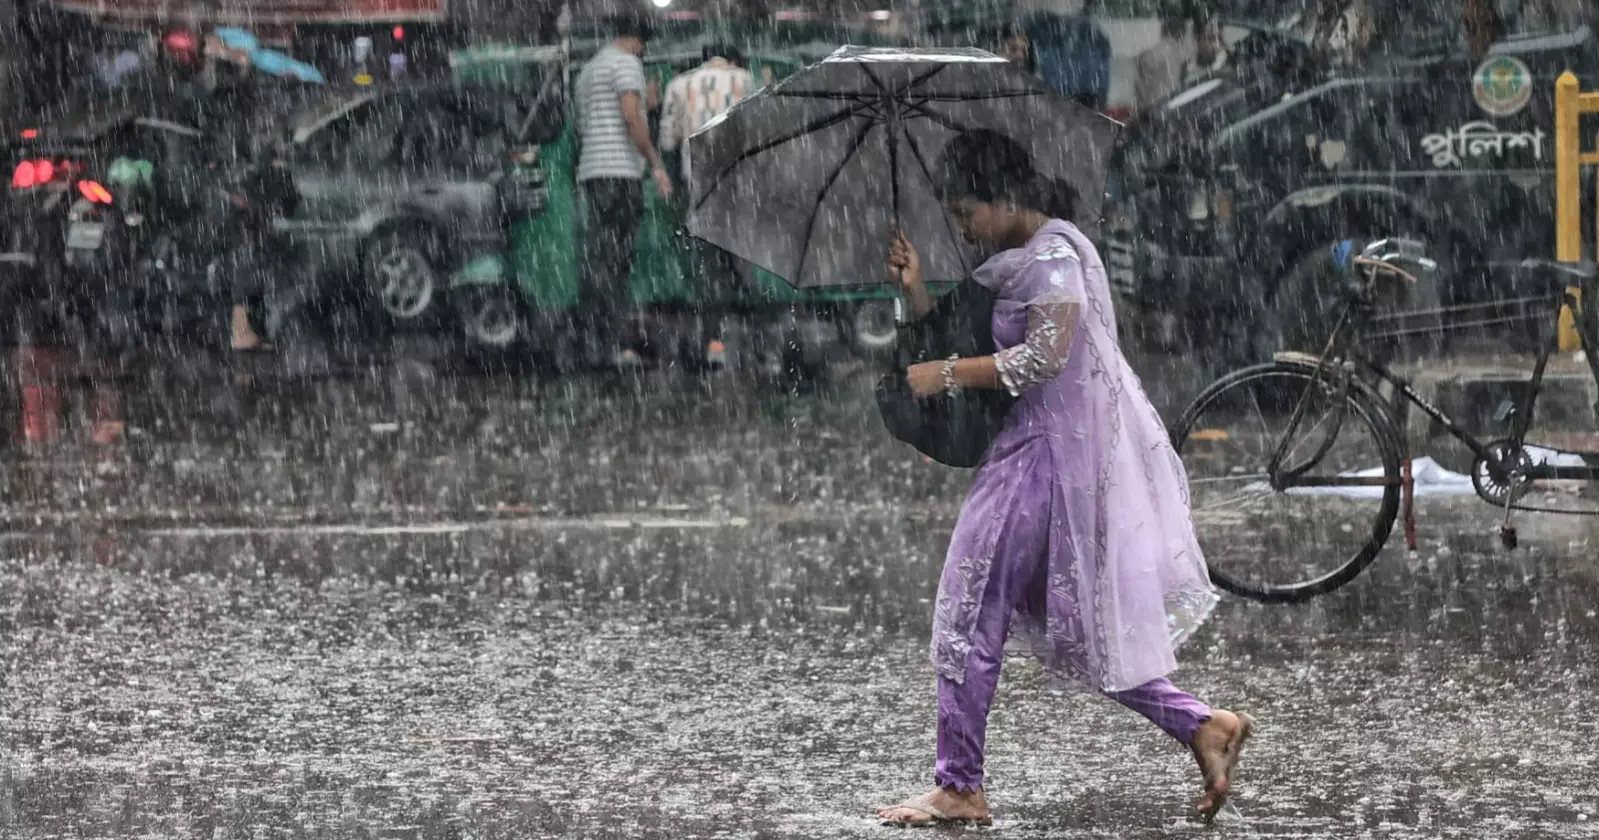 Weather forecast: Rain expected to continue for 4 days